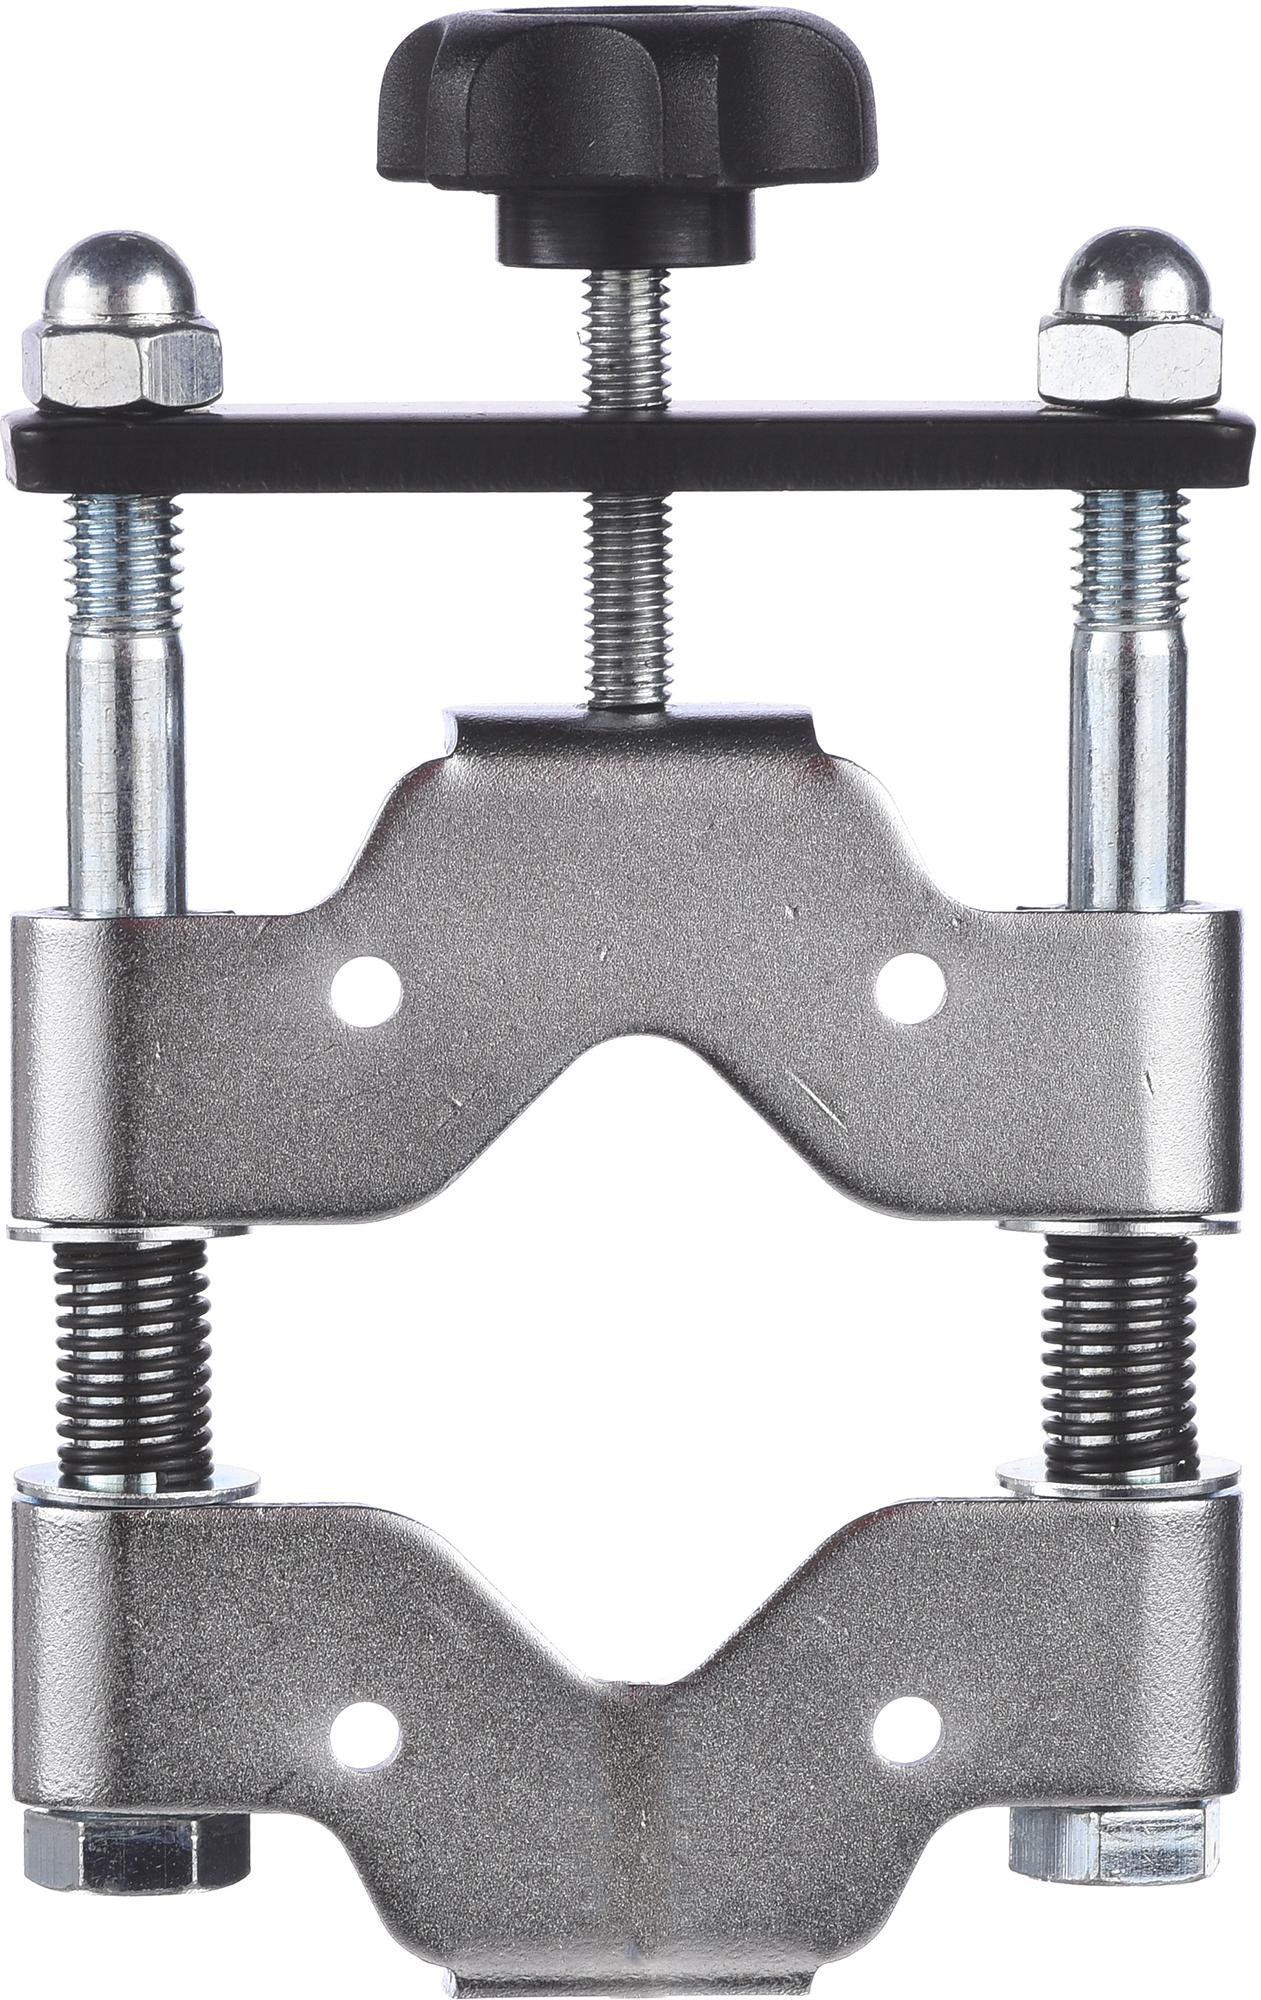 Lifeline Pro Crown Race Remover Tool - Silver